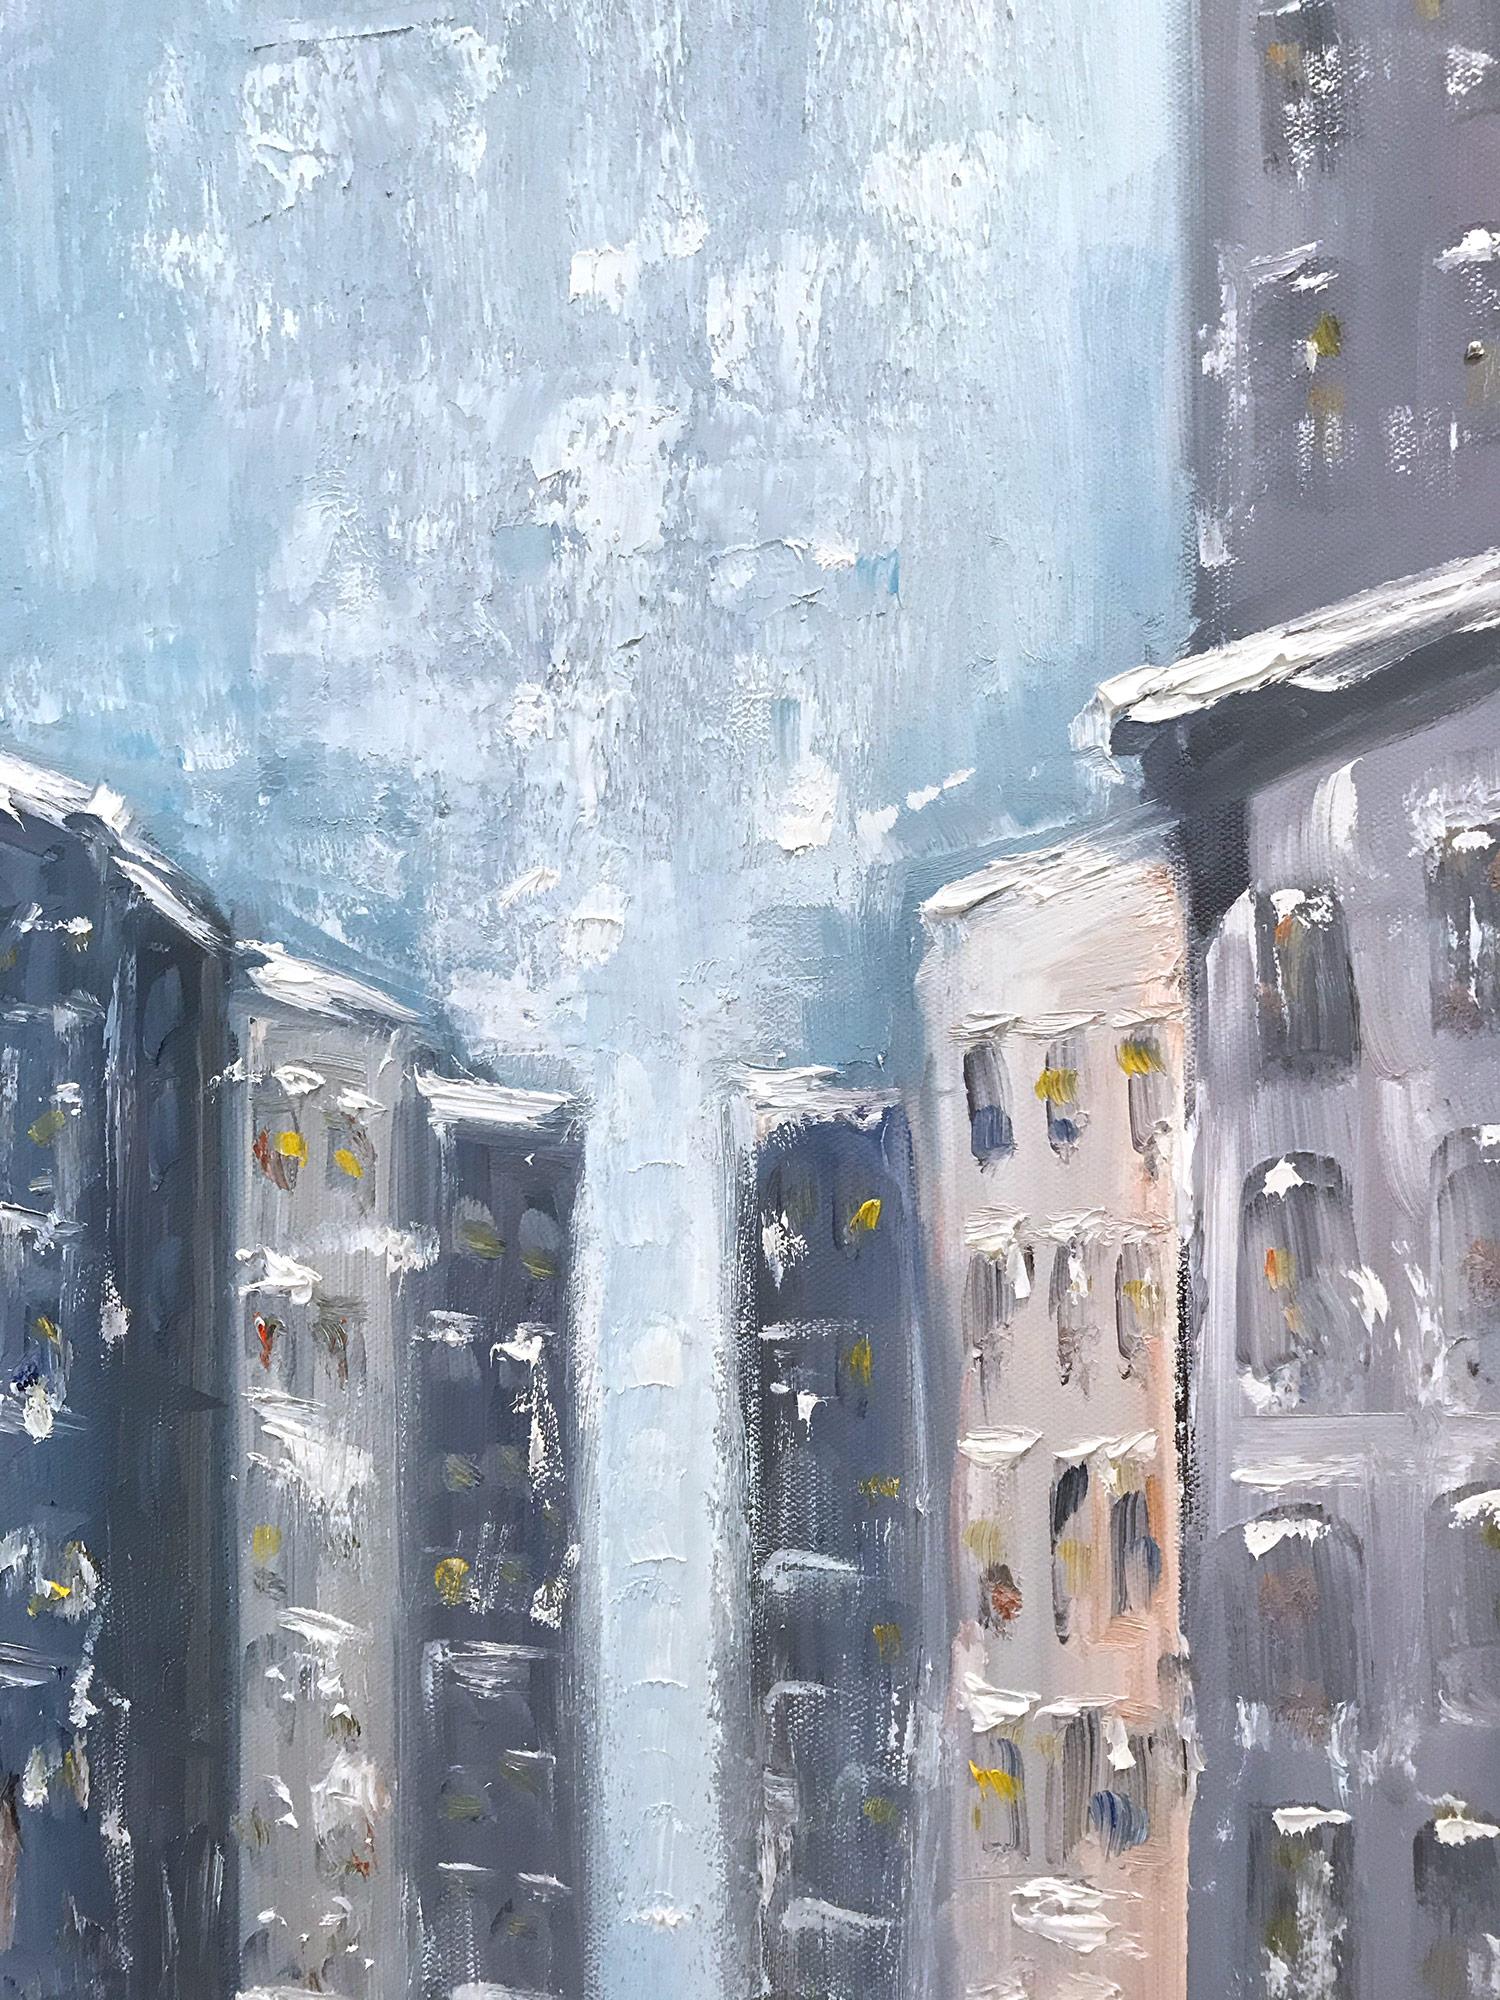 A charming depiction of the Flatiron building in New York City with figures in the snow. A cozy impressionistic street scene with colors of cobalts, whites, and burnt sienna's. An iconic street scene with beautiful brushwork and whimsical details,